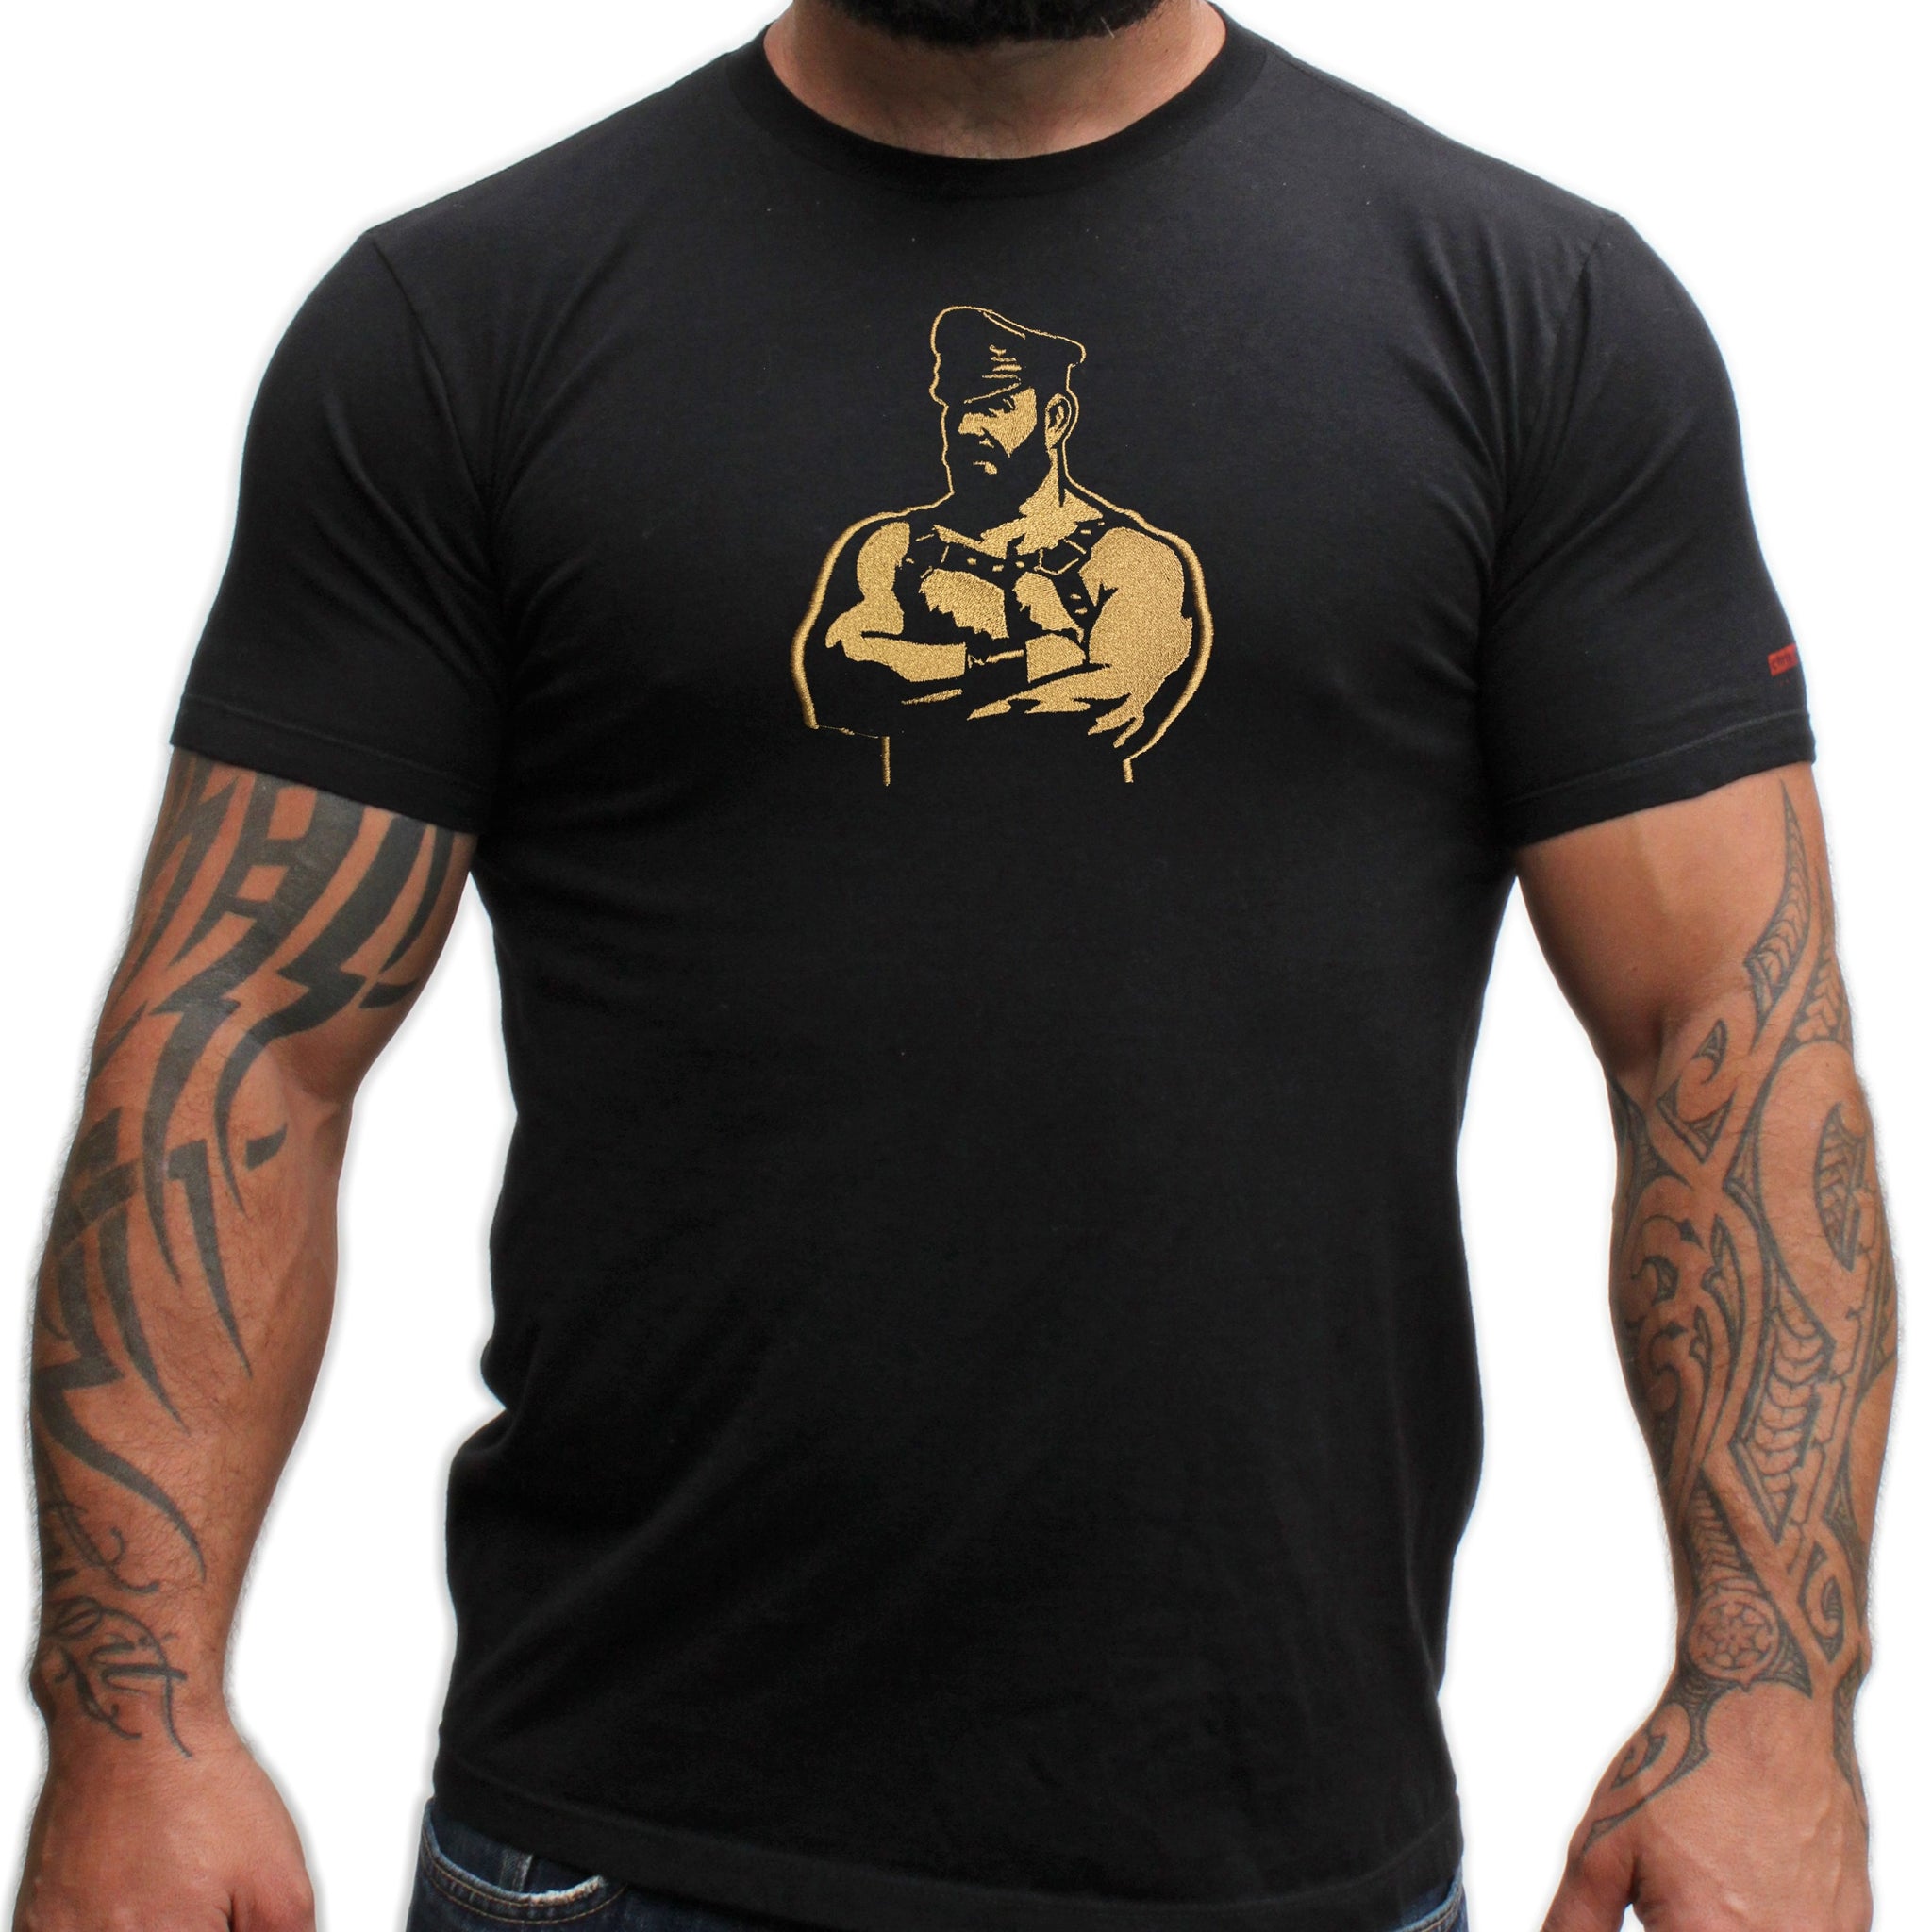 Leather Sir Embroidered Tshirt